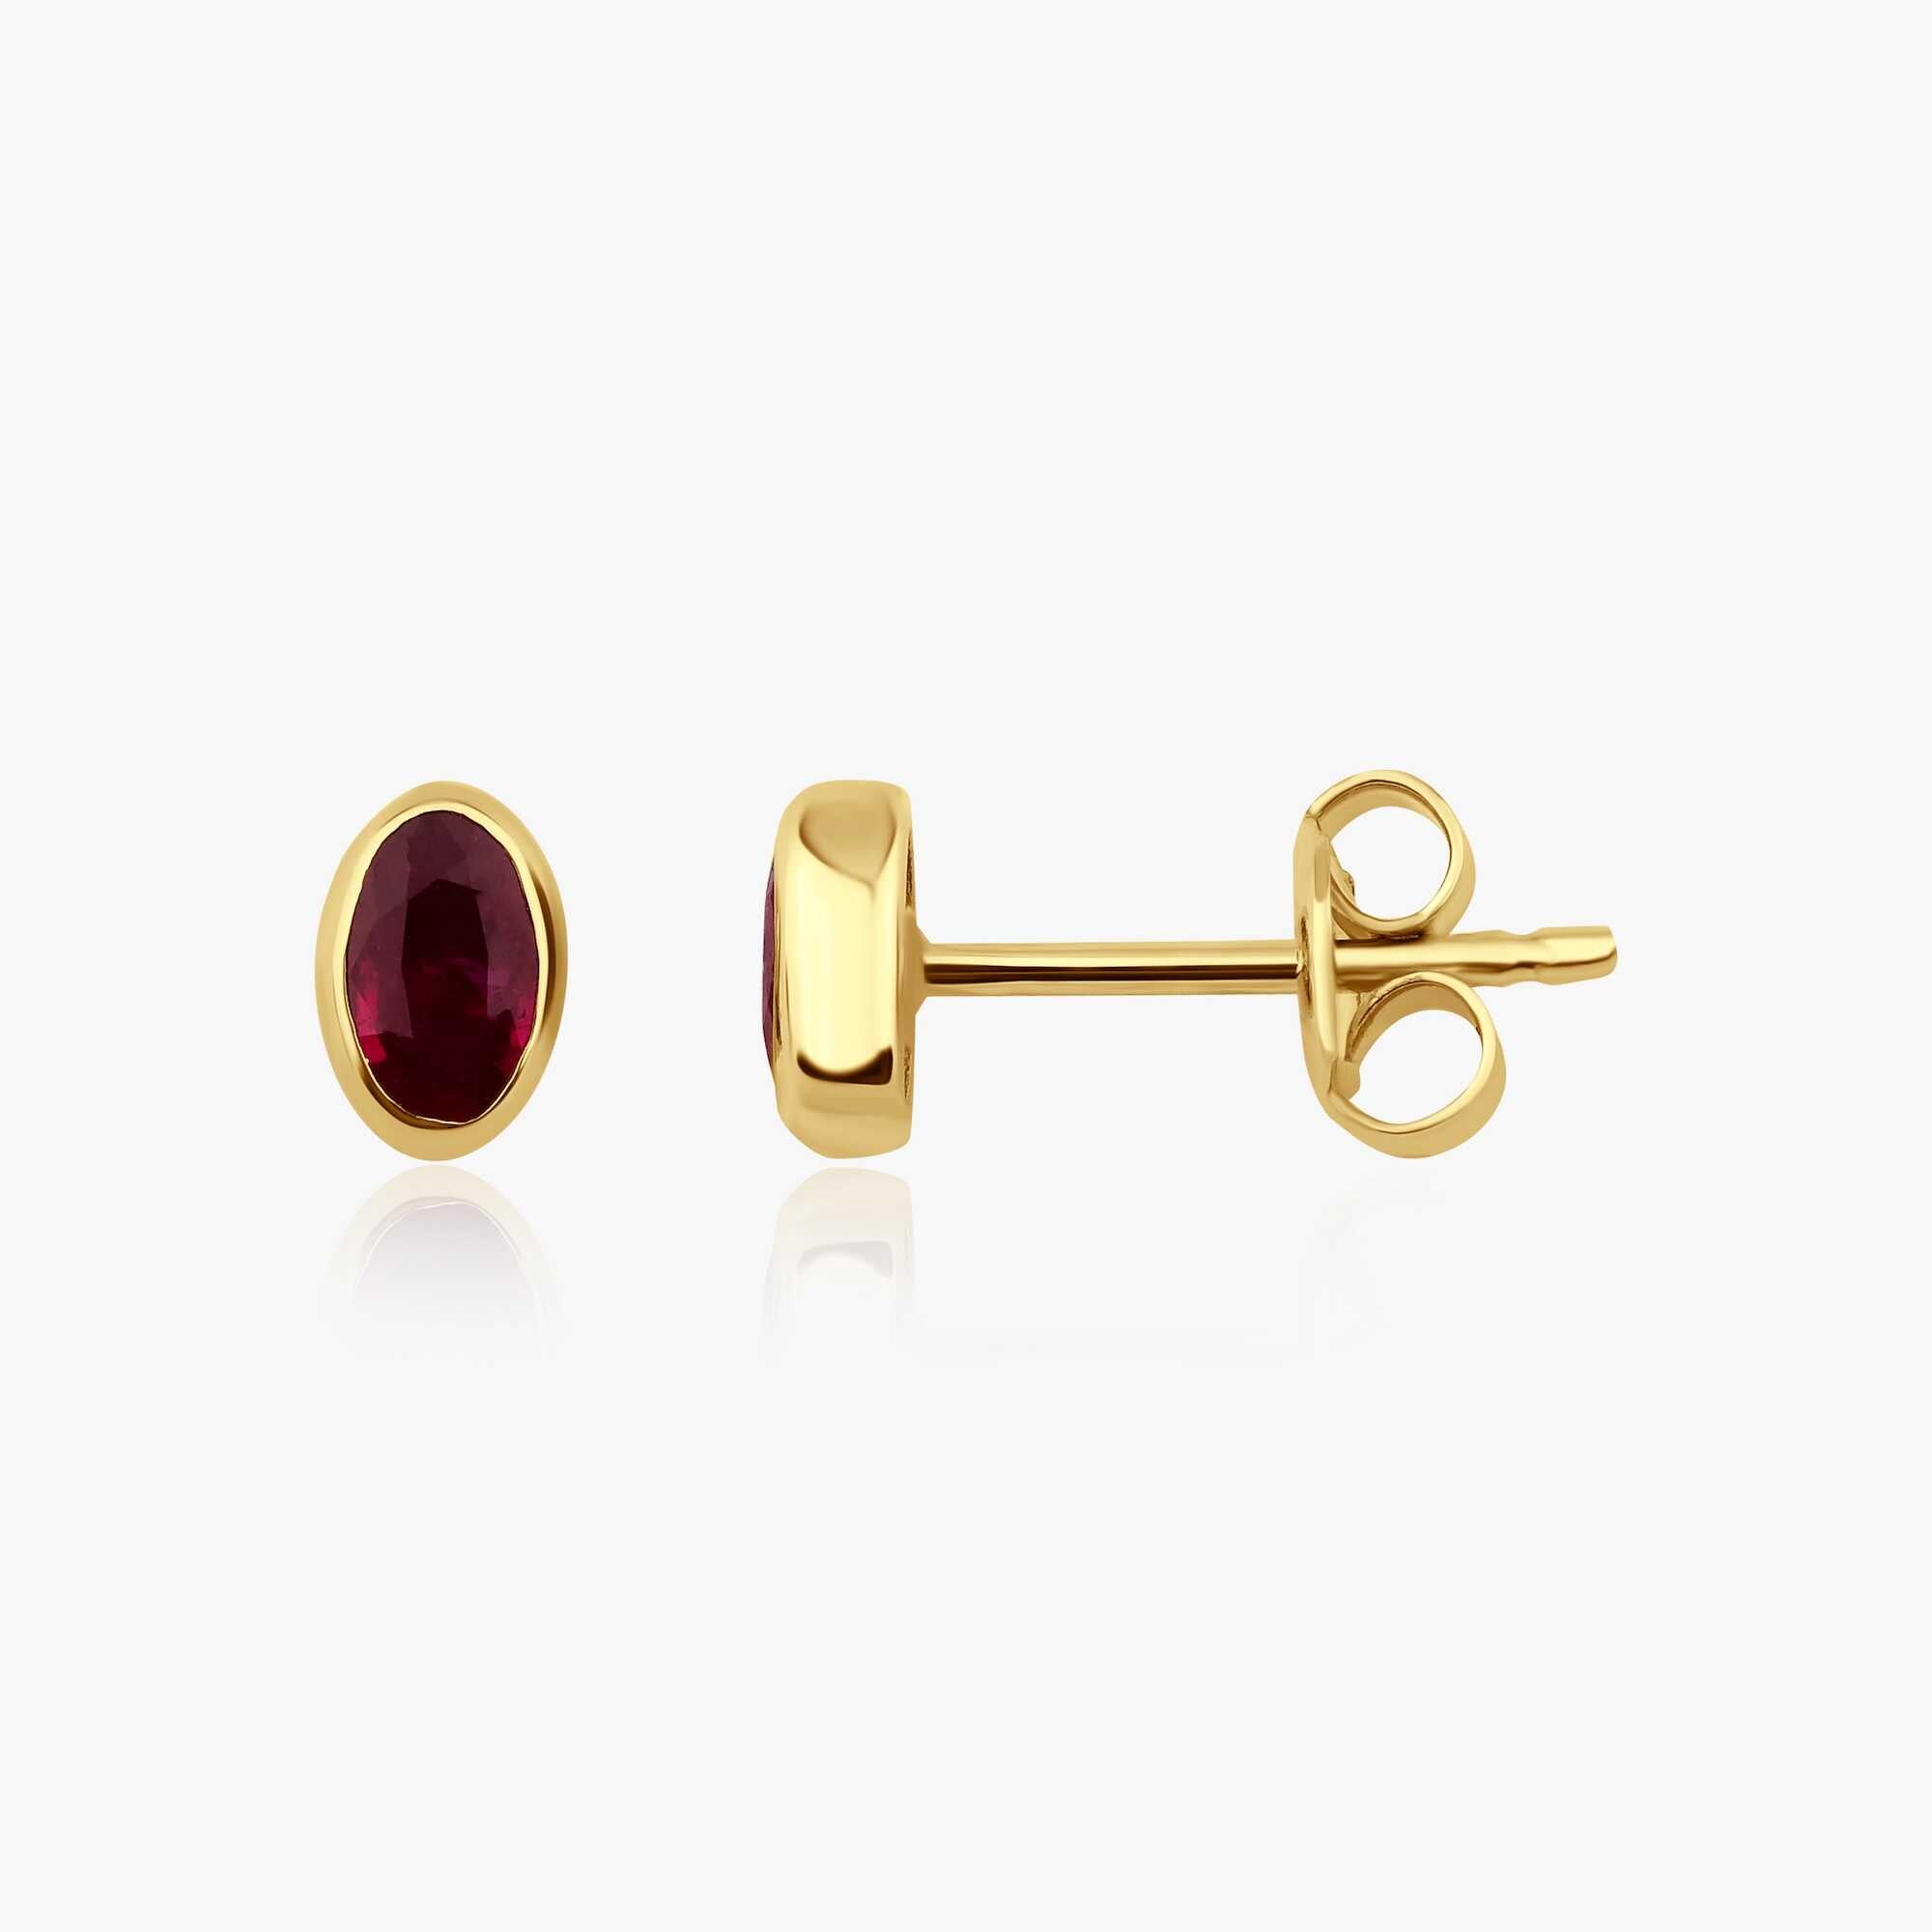 Oval Cut Ruby Stud Earrings Available in 14K and 18K Gold